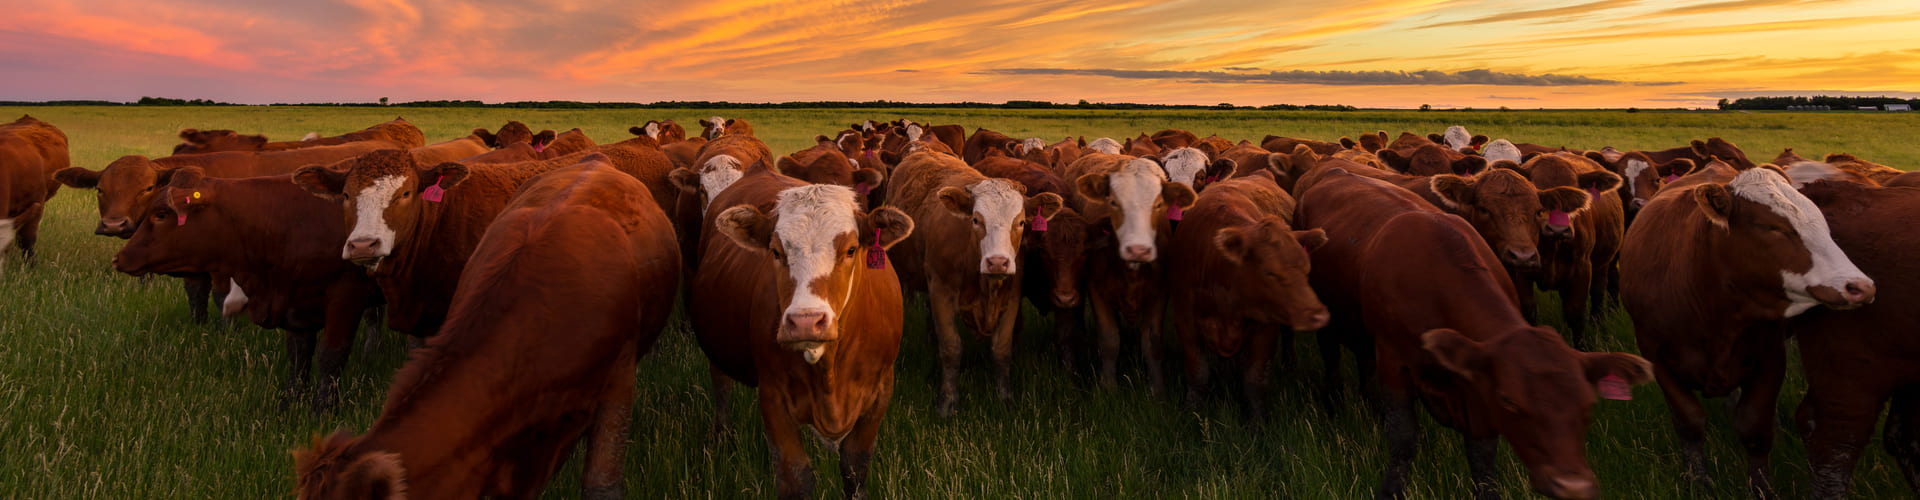 herd of beef cattle standing in a field at sunset